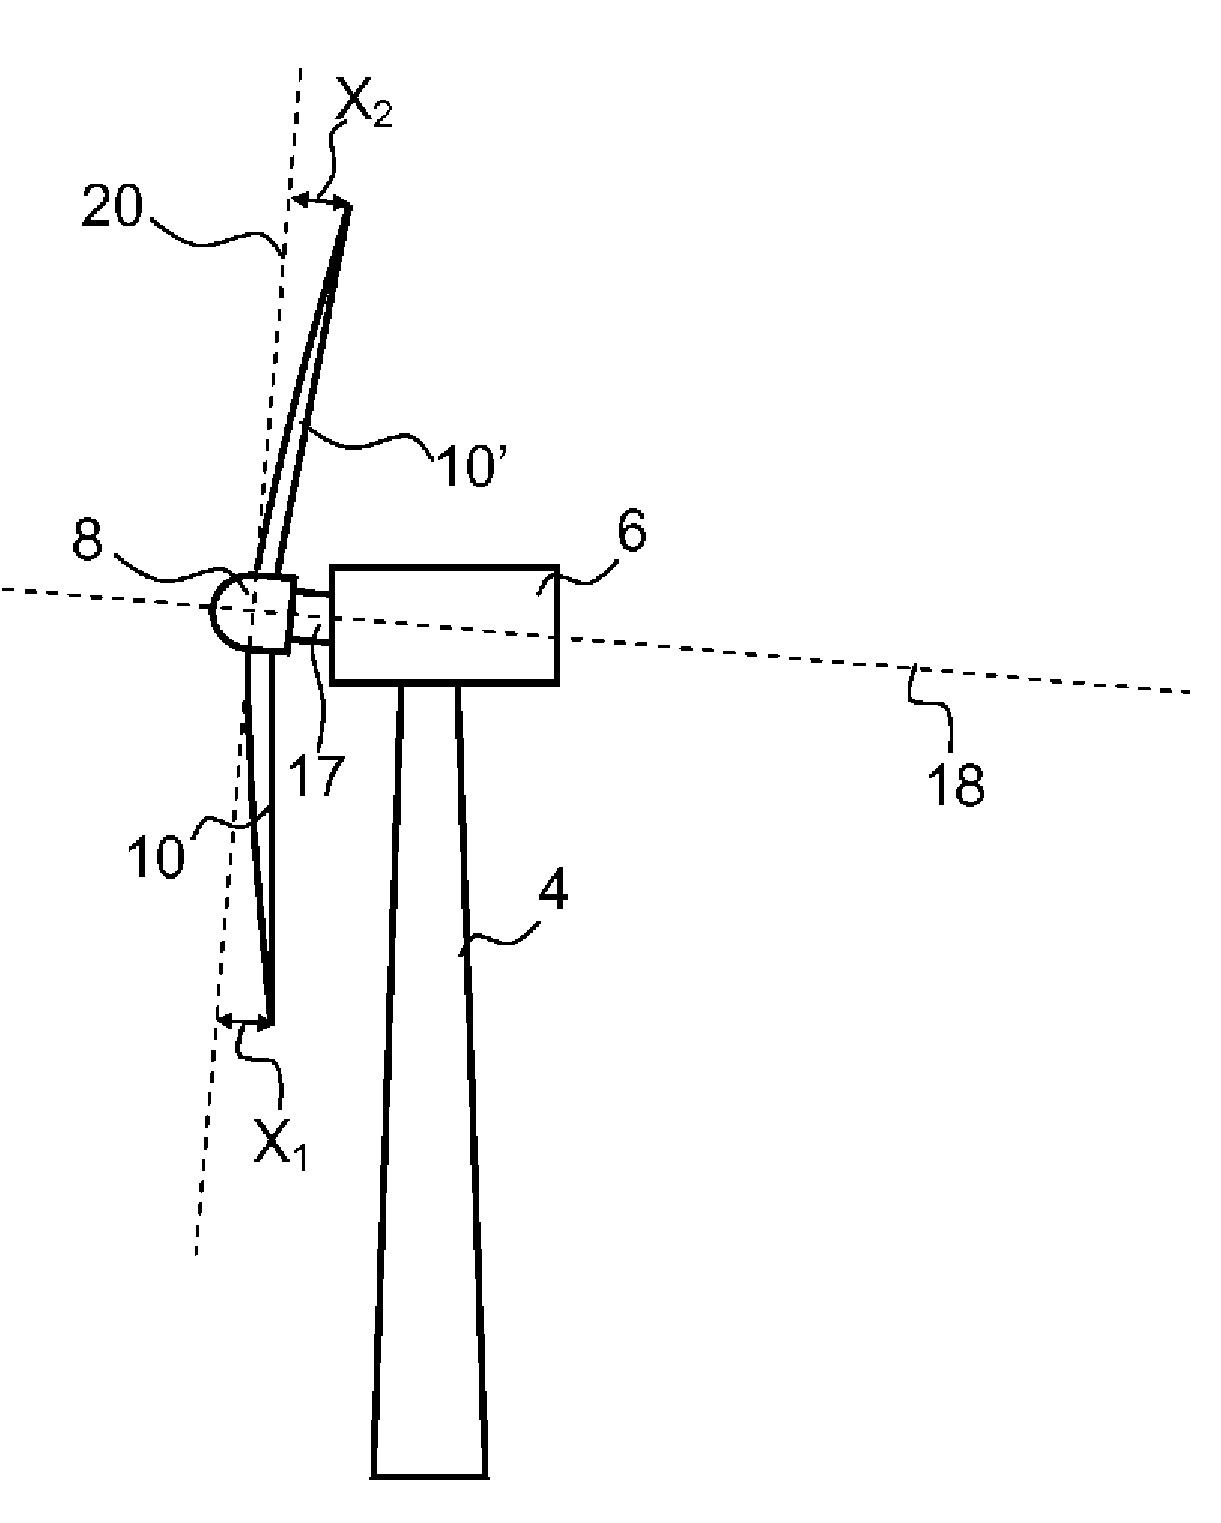 Method of controlling a wind turbine and related system